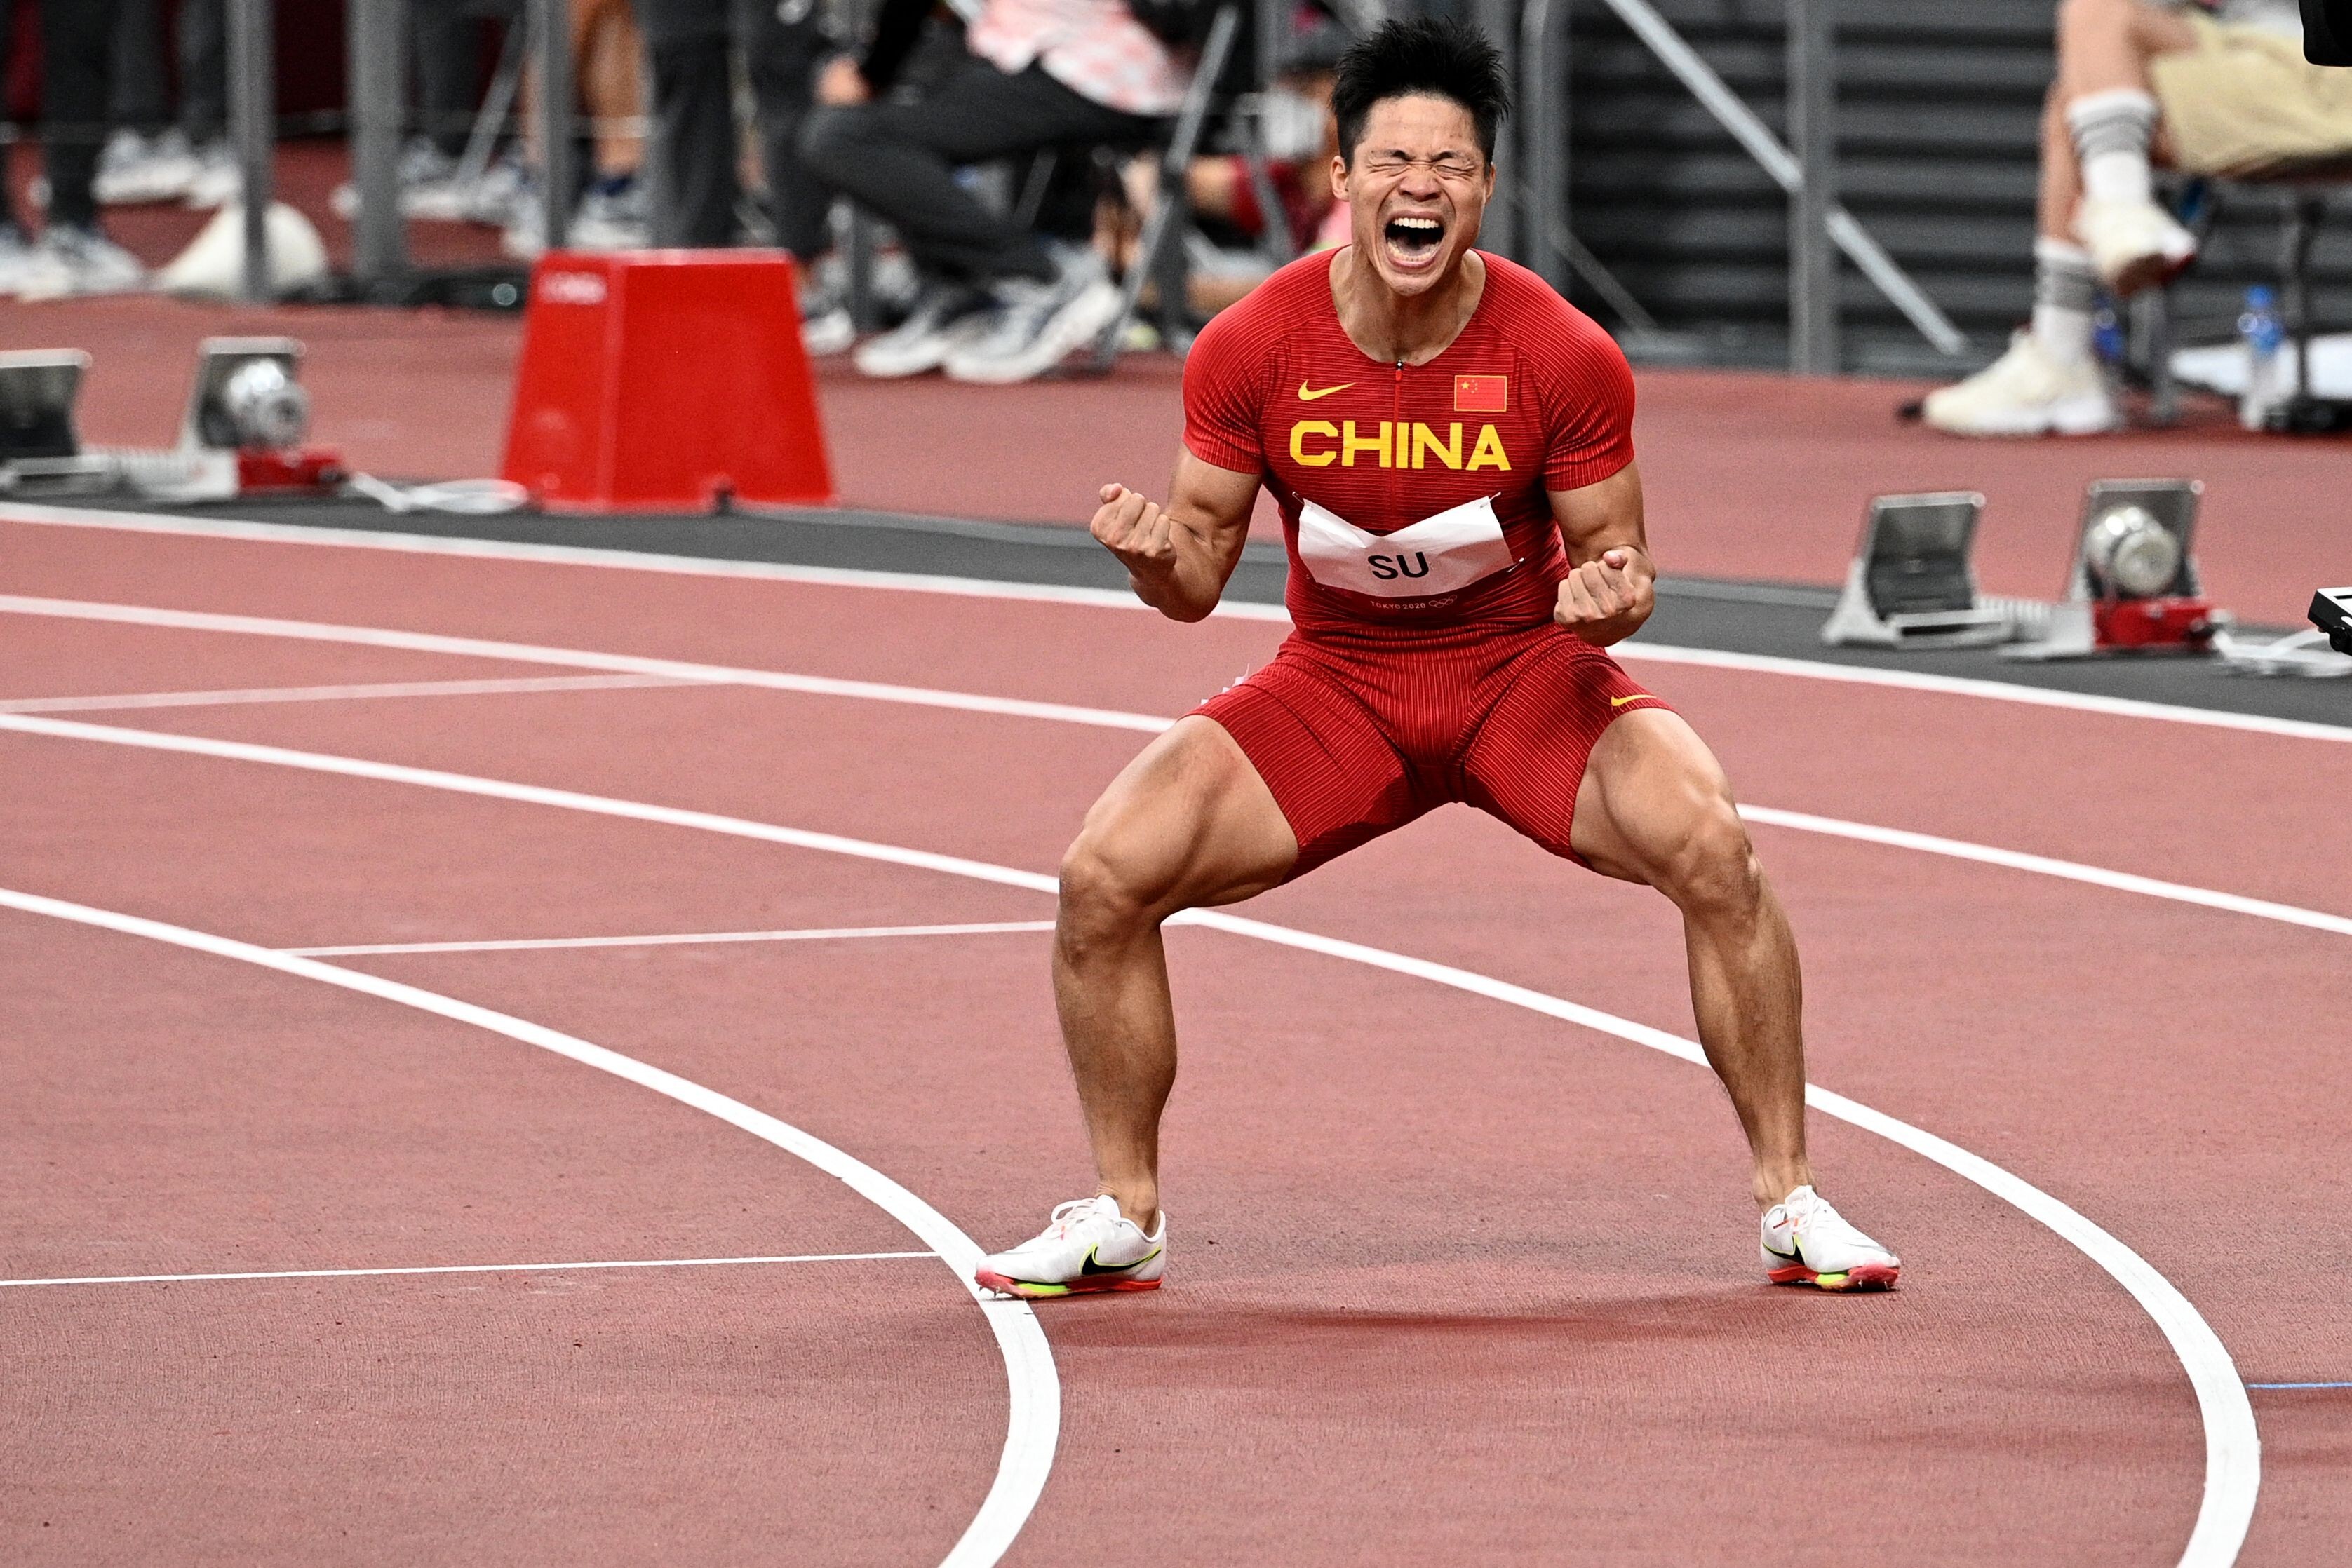 China's Su Bingtian celebrates after winning the men's 100m semi-finals during the Tokyo 2020 Olympic Games at the Olympic Stadium in Tokyo. Photo: AFP